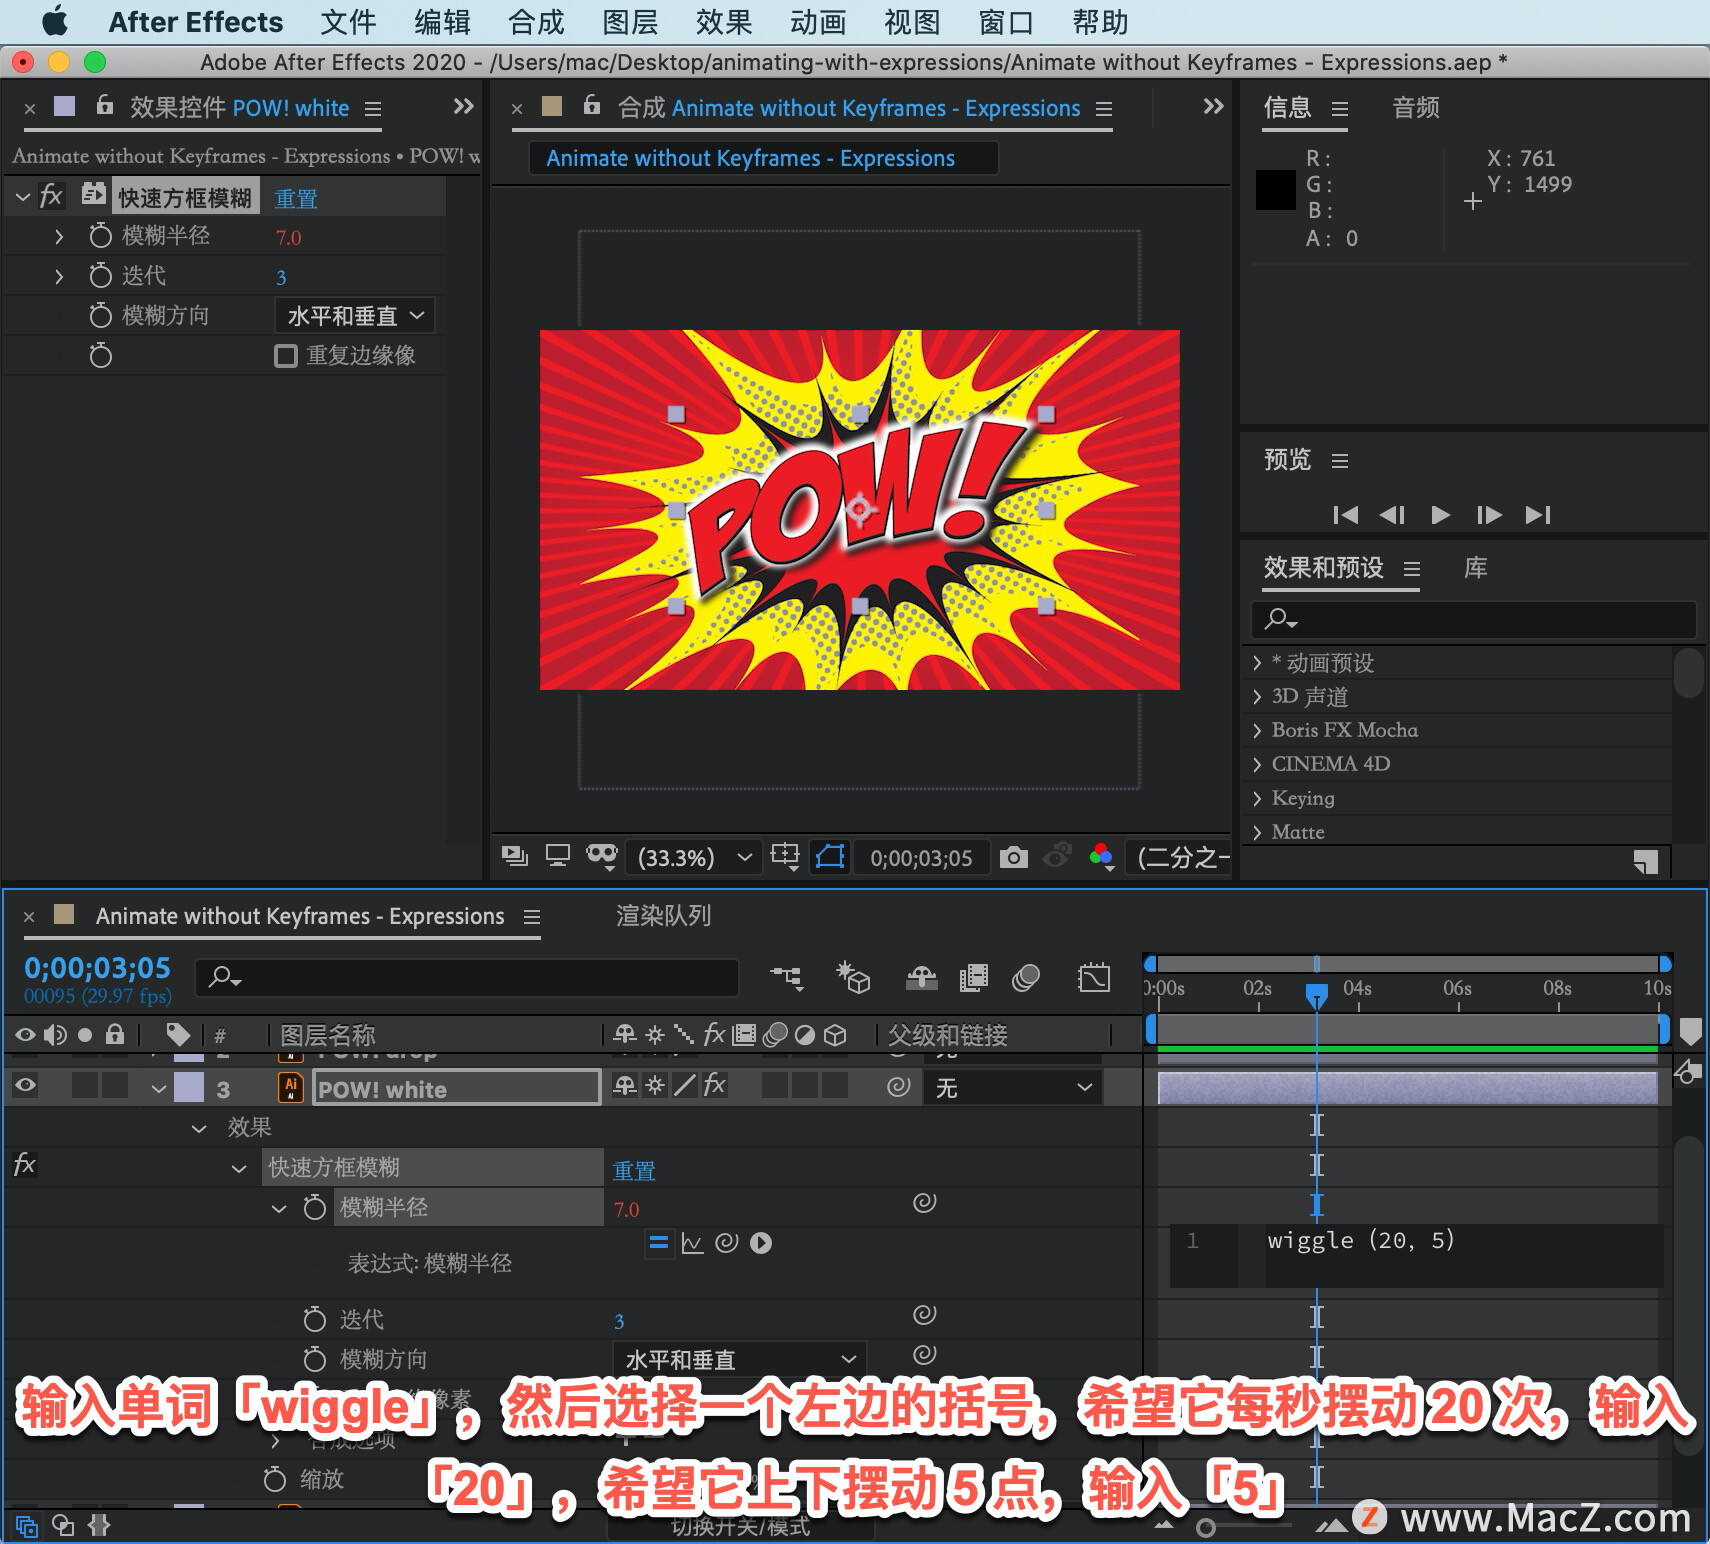 After Effects ̡̳73 After Effects ʹģ뾶Ч